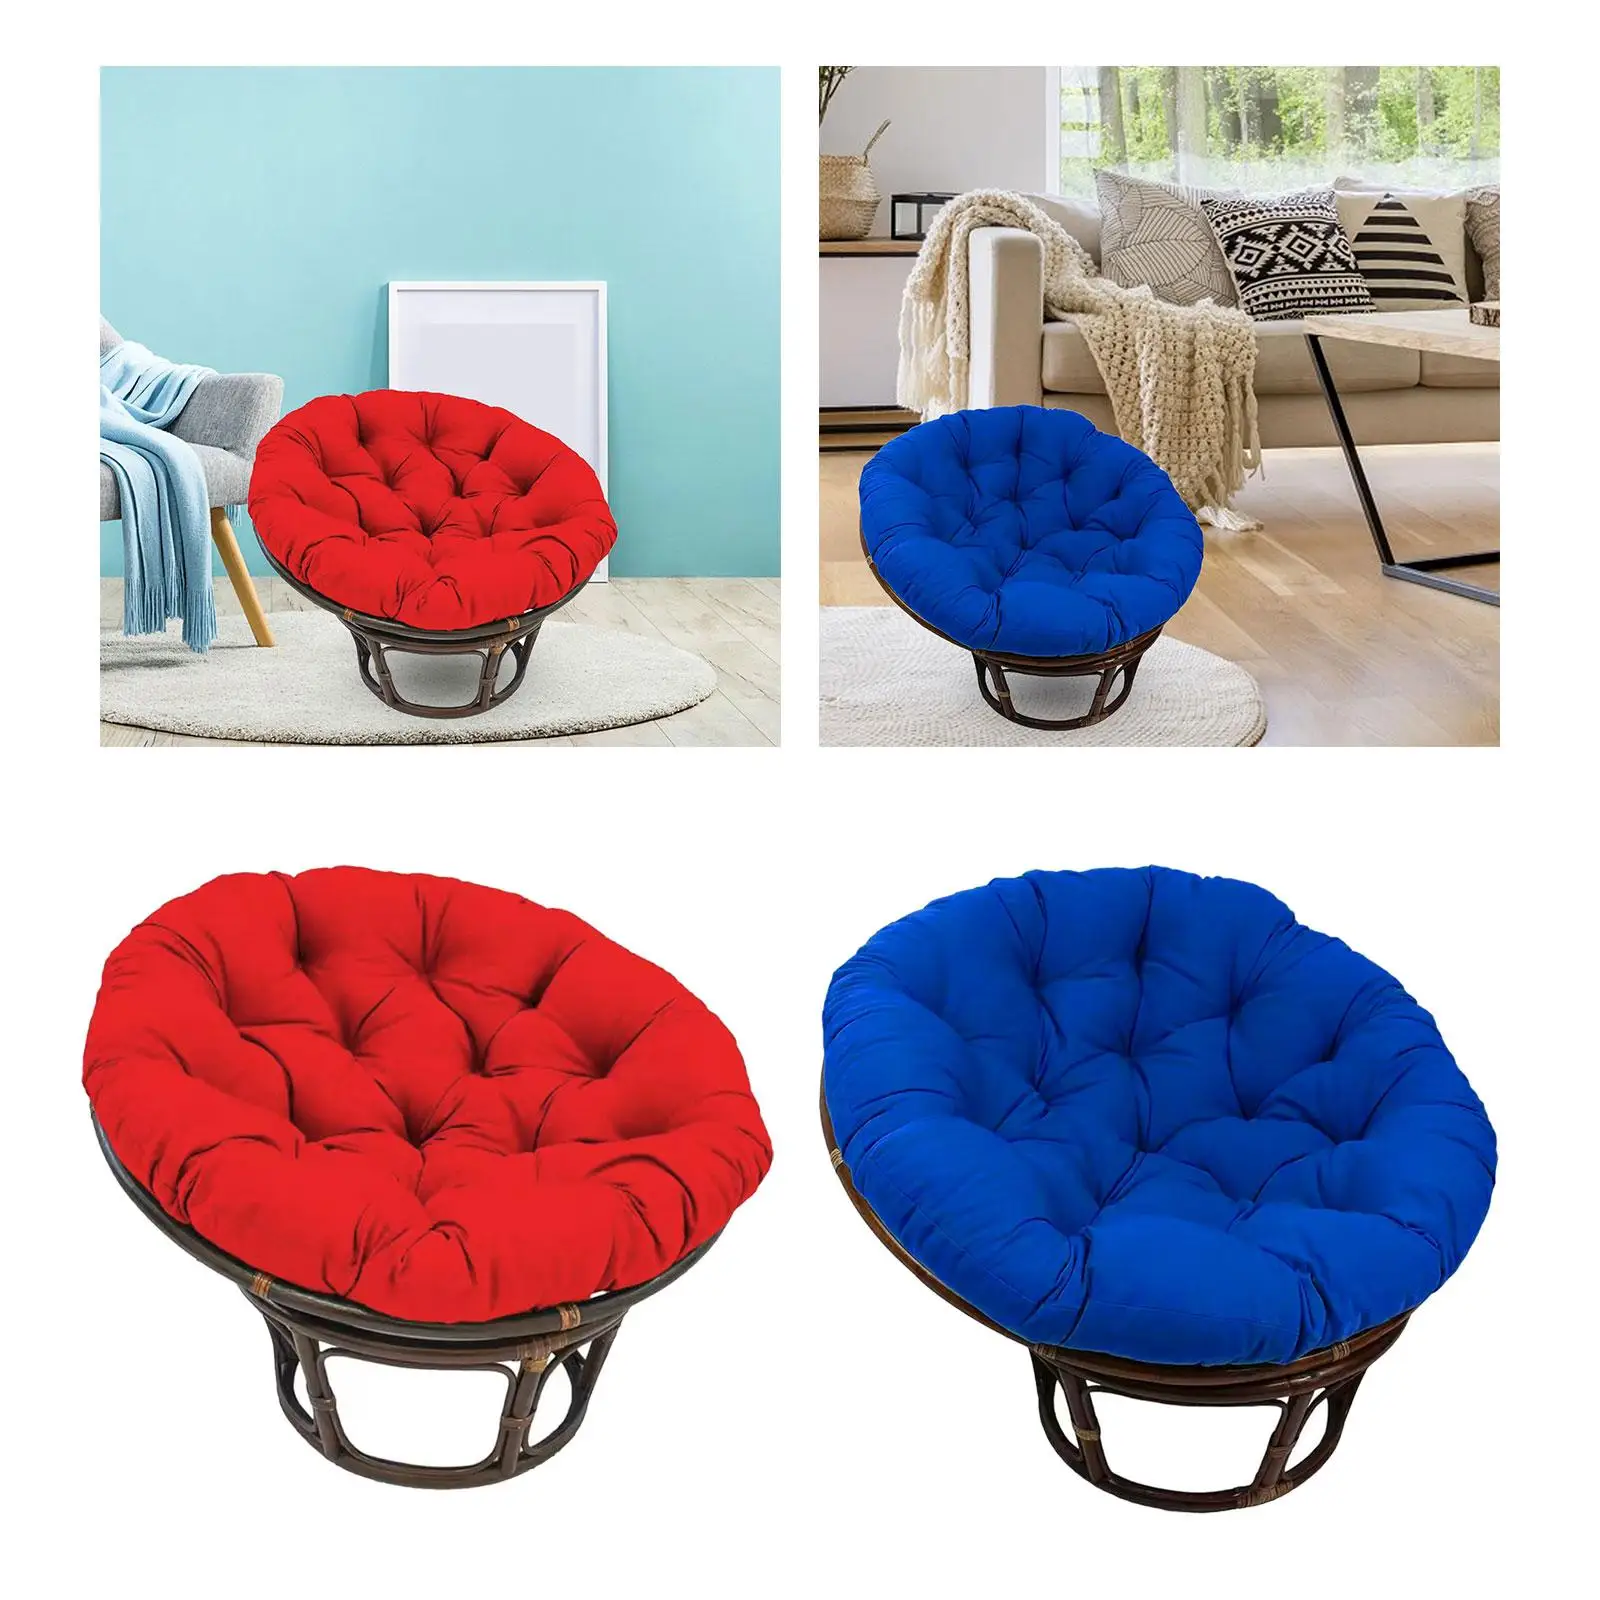 Thickened Overstuffed Round Cushion Hanging Egg Chair Cushion Washable Hanging Basket Chair Cushion for Egg Chair Rocking Chairs